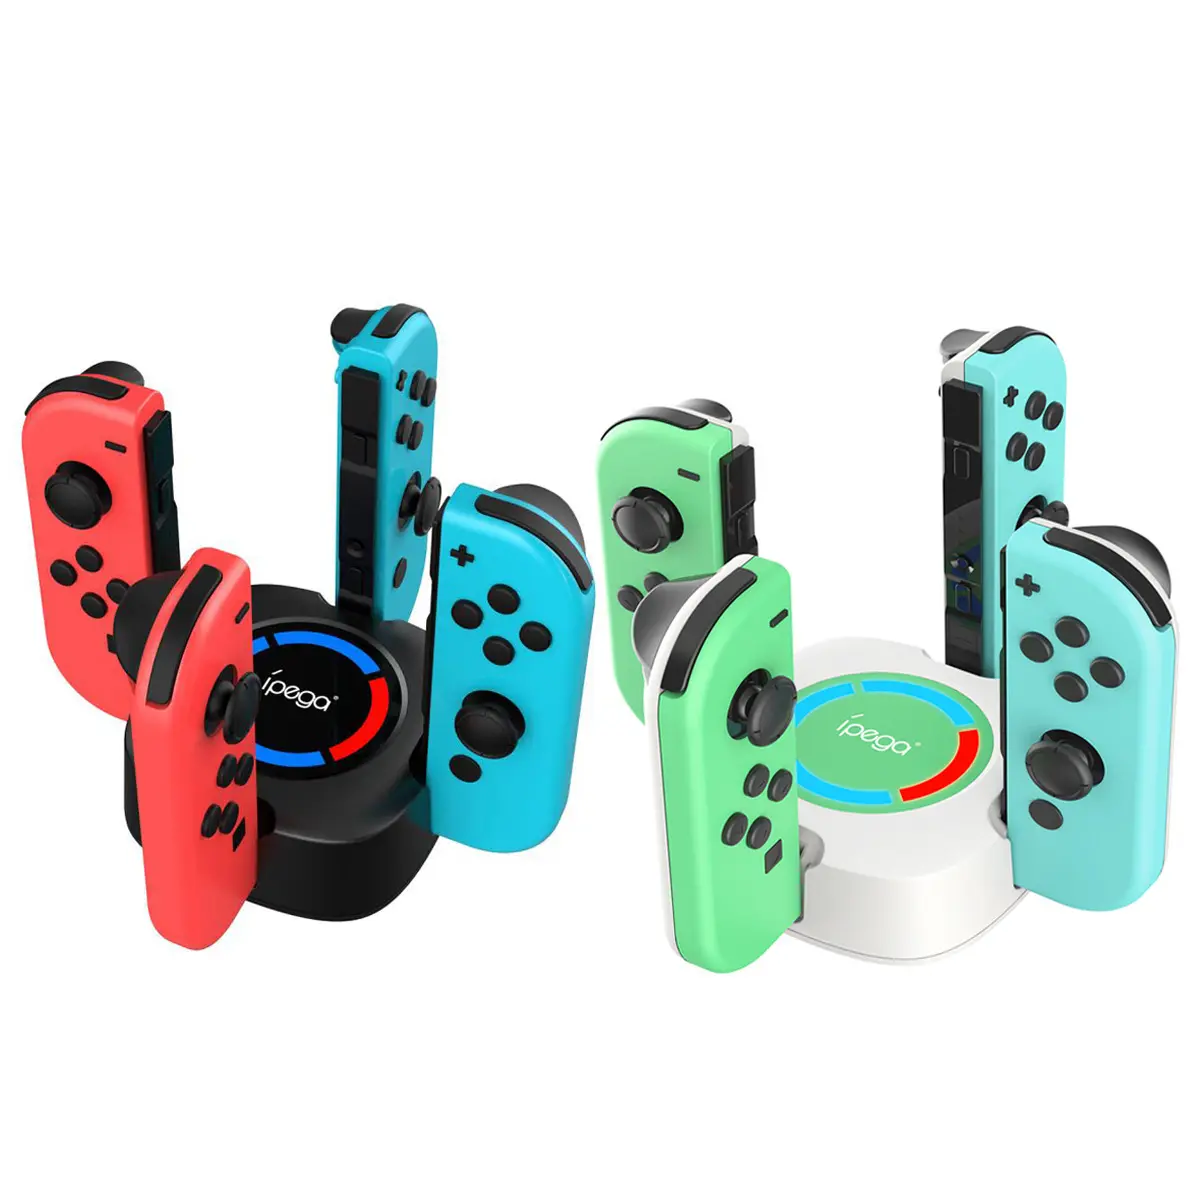 Ipega PG-9177 4 in 1 Charging For Nintendo Switch Joy Cons Charger Dock For N-Switch Joy Cons Controller Charging Station Stand